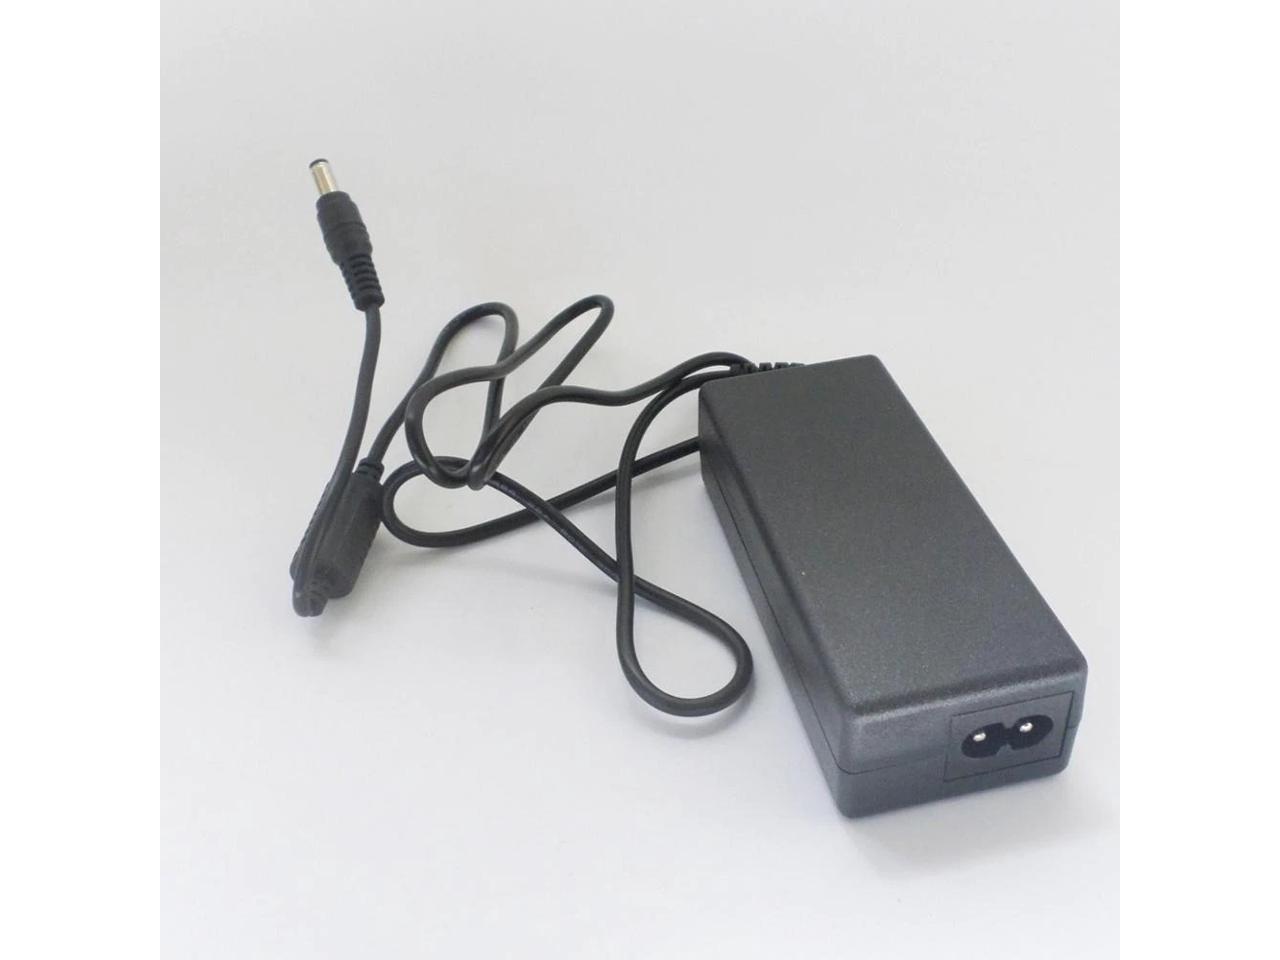 19V 3.42A AC Adapter Charger For Toshiba Satellite L735-S3212 L735-S3210  L735-S3220 L750D L750D-BT5N11 L750D-ST4N01 L745-S4110